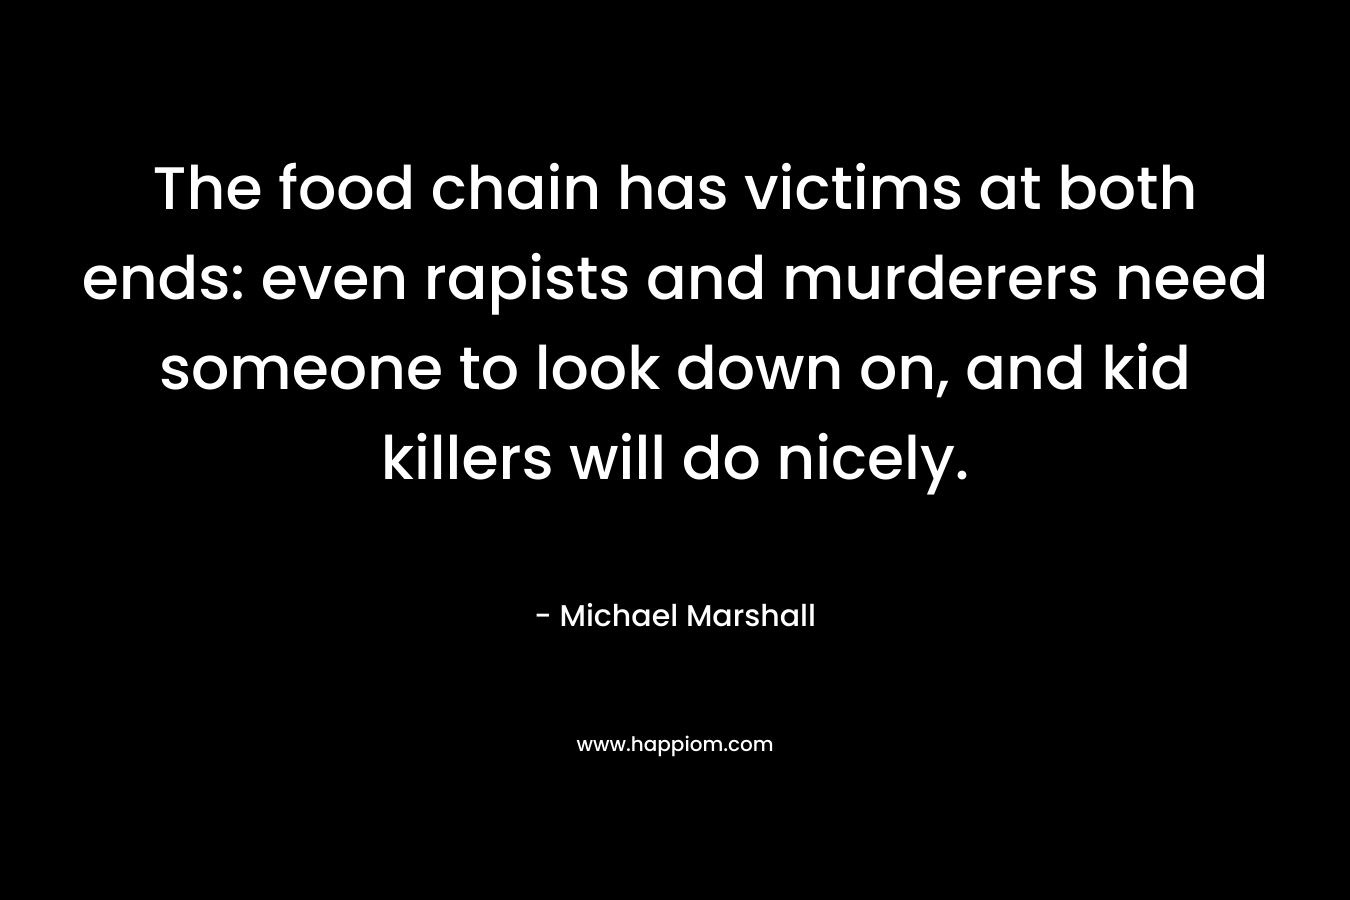 The food chain has victims at both ends: even rapists and murderers need someone to look down on, and kid killers will do nicely. – Michael Marshall